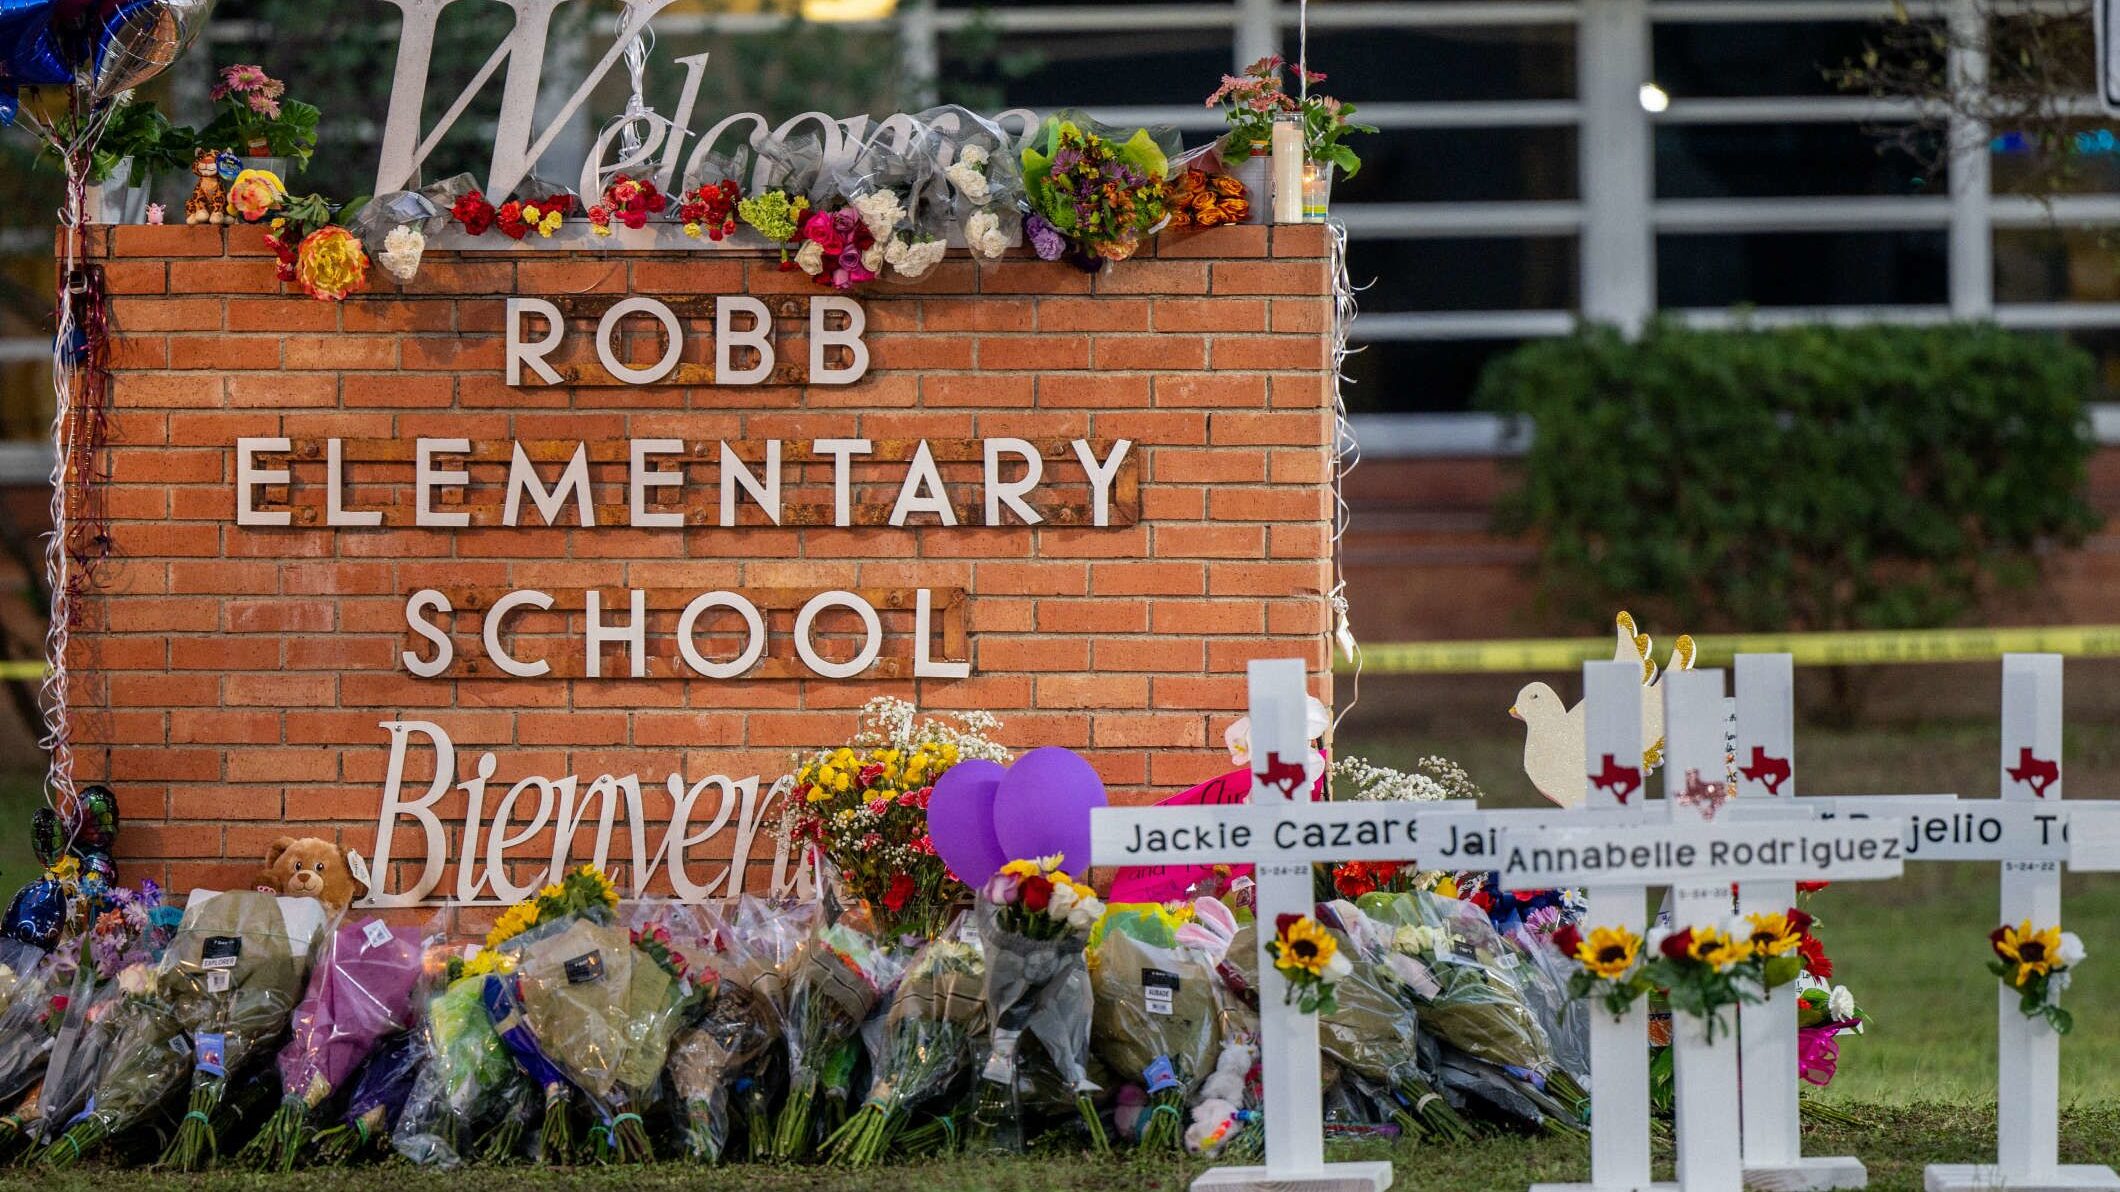 A memorial dedicated to the victims of the mass shooting at Robb Elementary School in Uvalde, Texas...